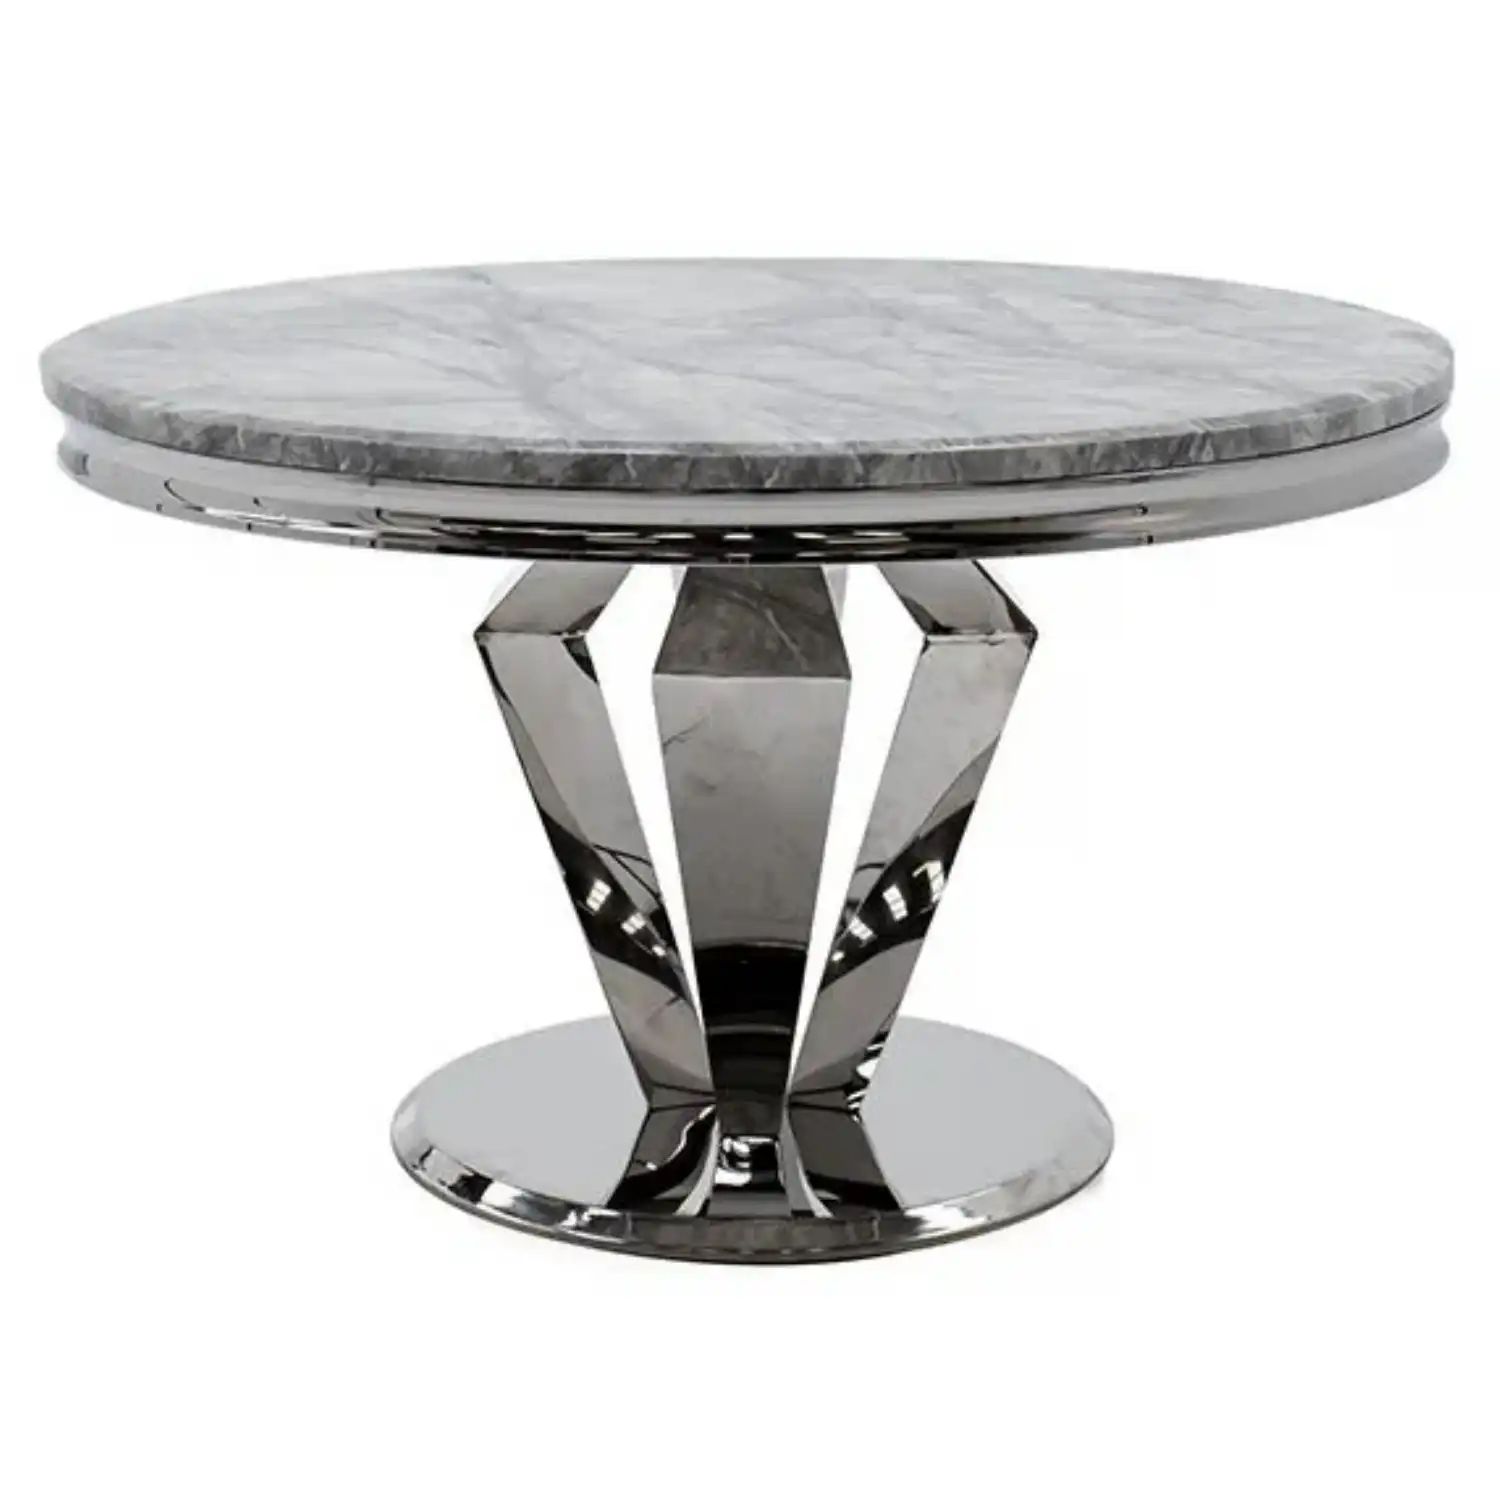 Large Round Grey Marble Top Stainless Steel Dining Table